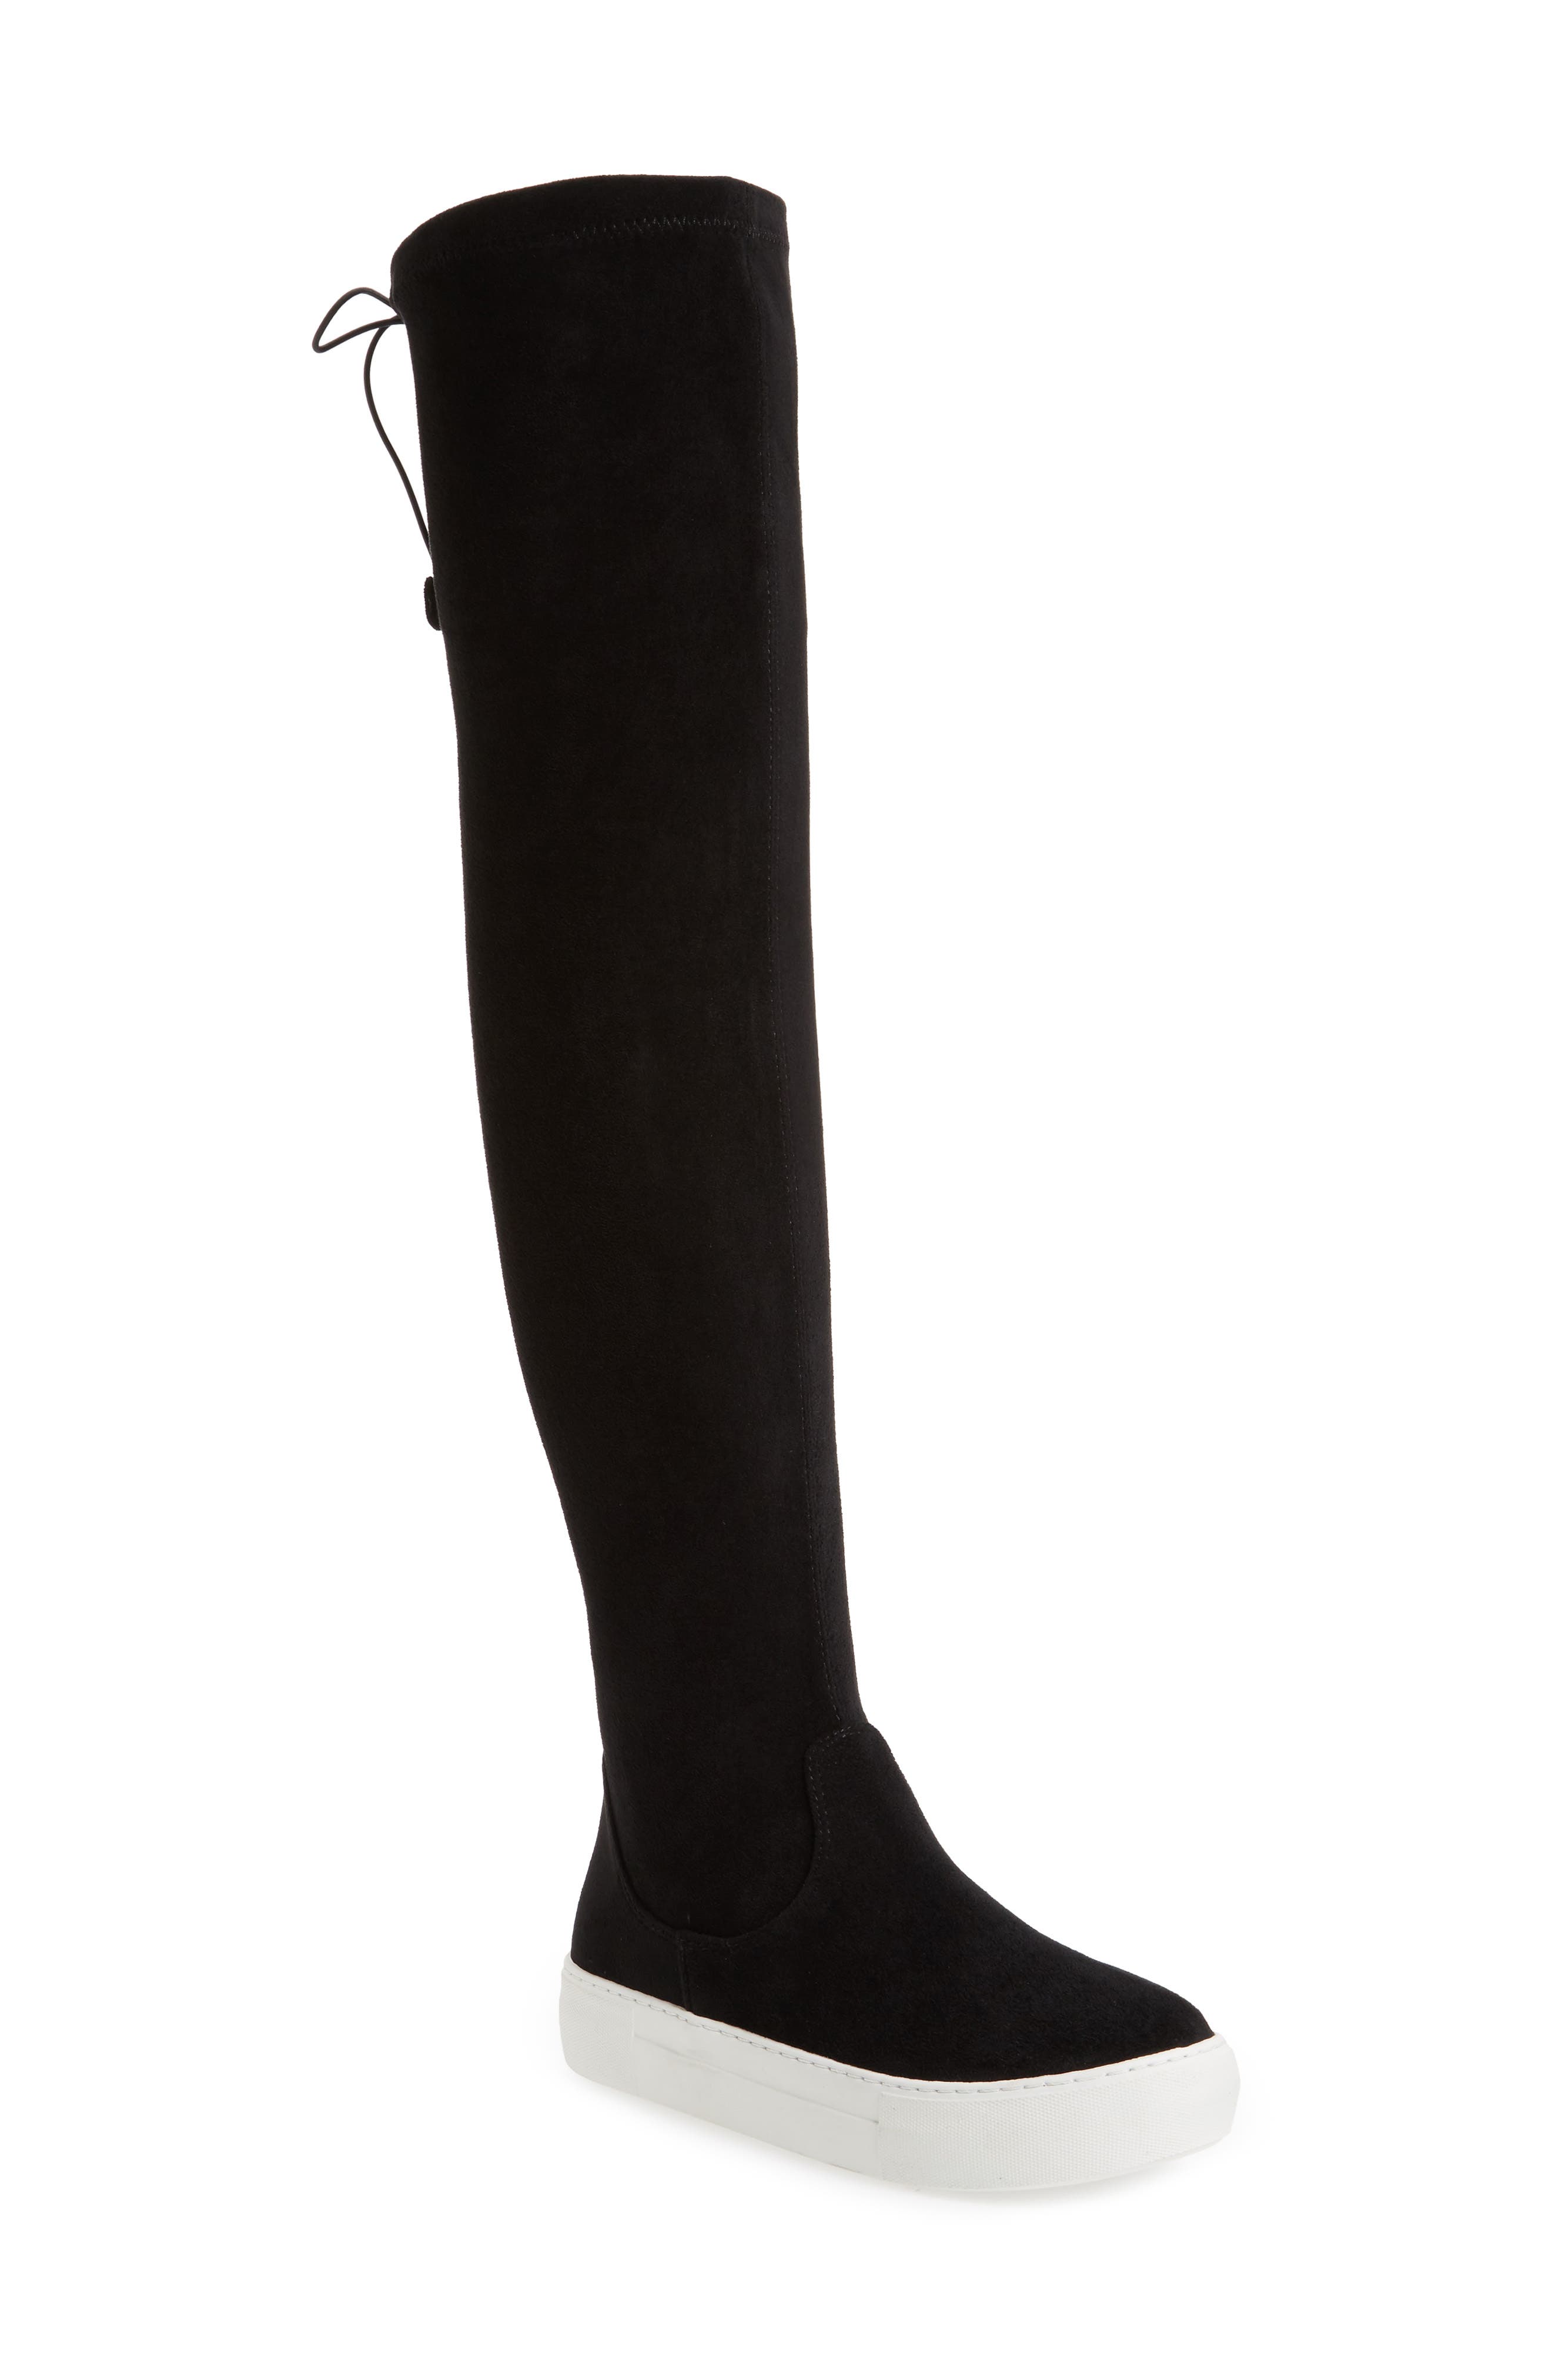 JSlides Ary Over the Knee Boot (Women 